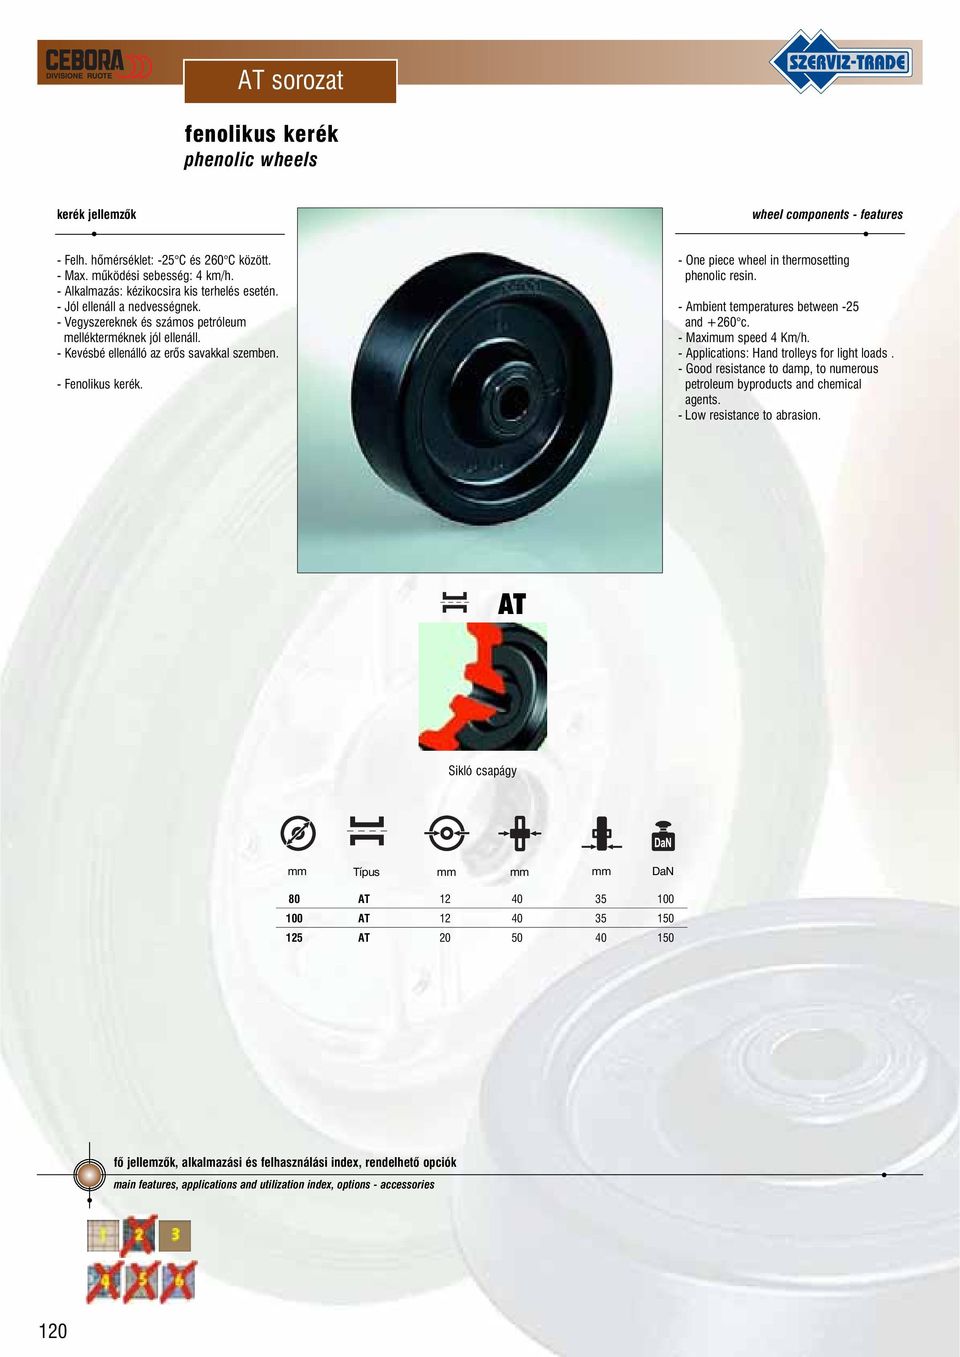 - Fenolikus kerék. - One piece wheel in thermosetting phenolic resin. - Ambient temperatures between -25 and +260 c. - Maximum speed 4 Km/h. - Applications: Hand trolleys for light loads.